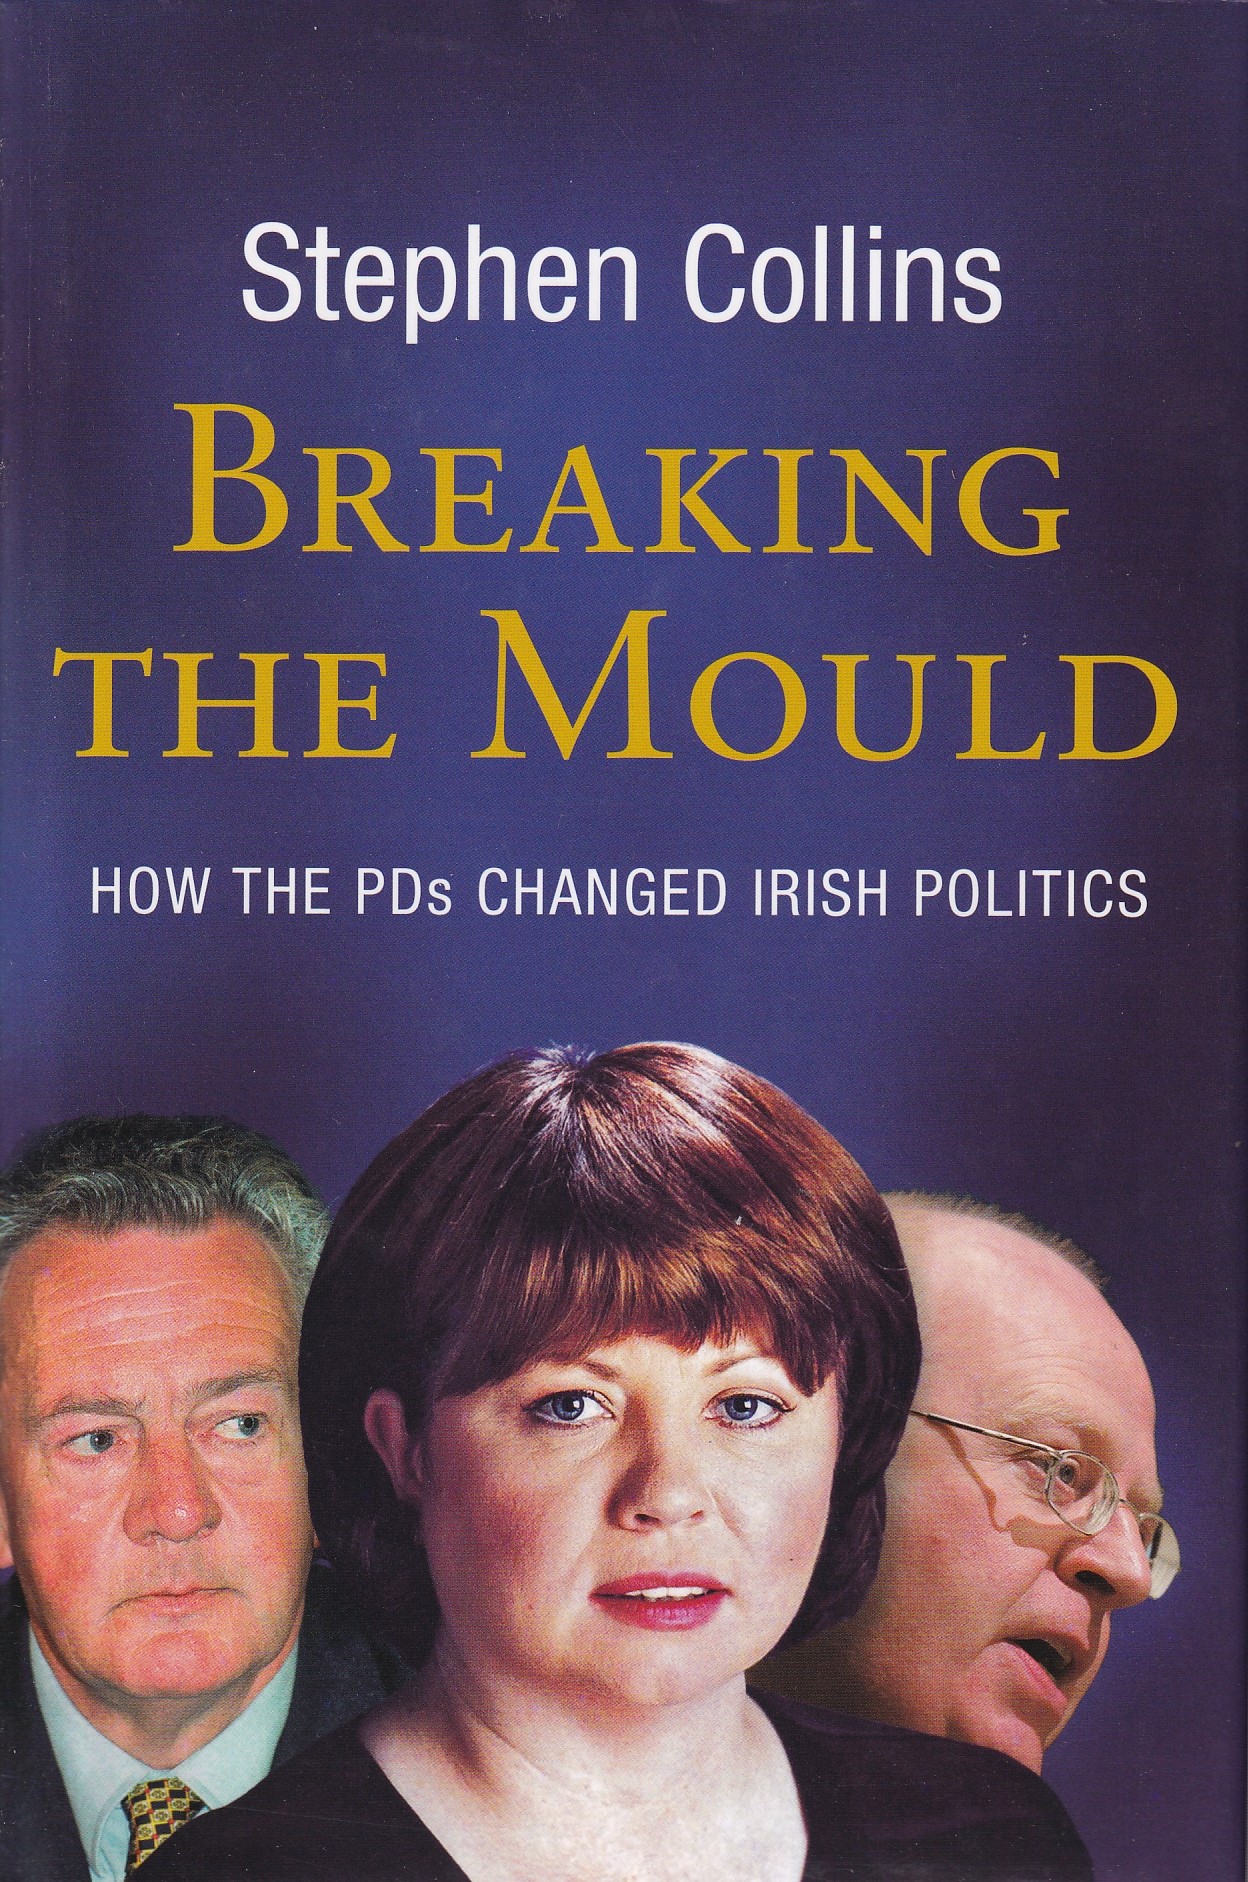 Breaking the Mould: How the PDs Changed Irish Politics by Stephen Collins